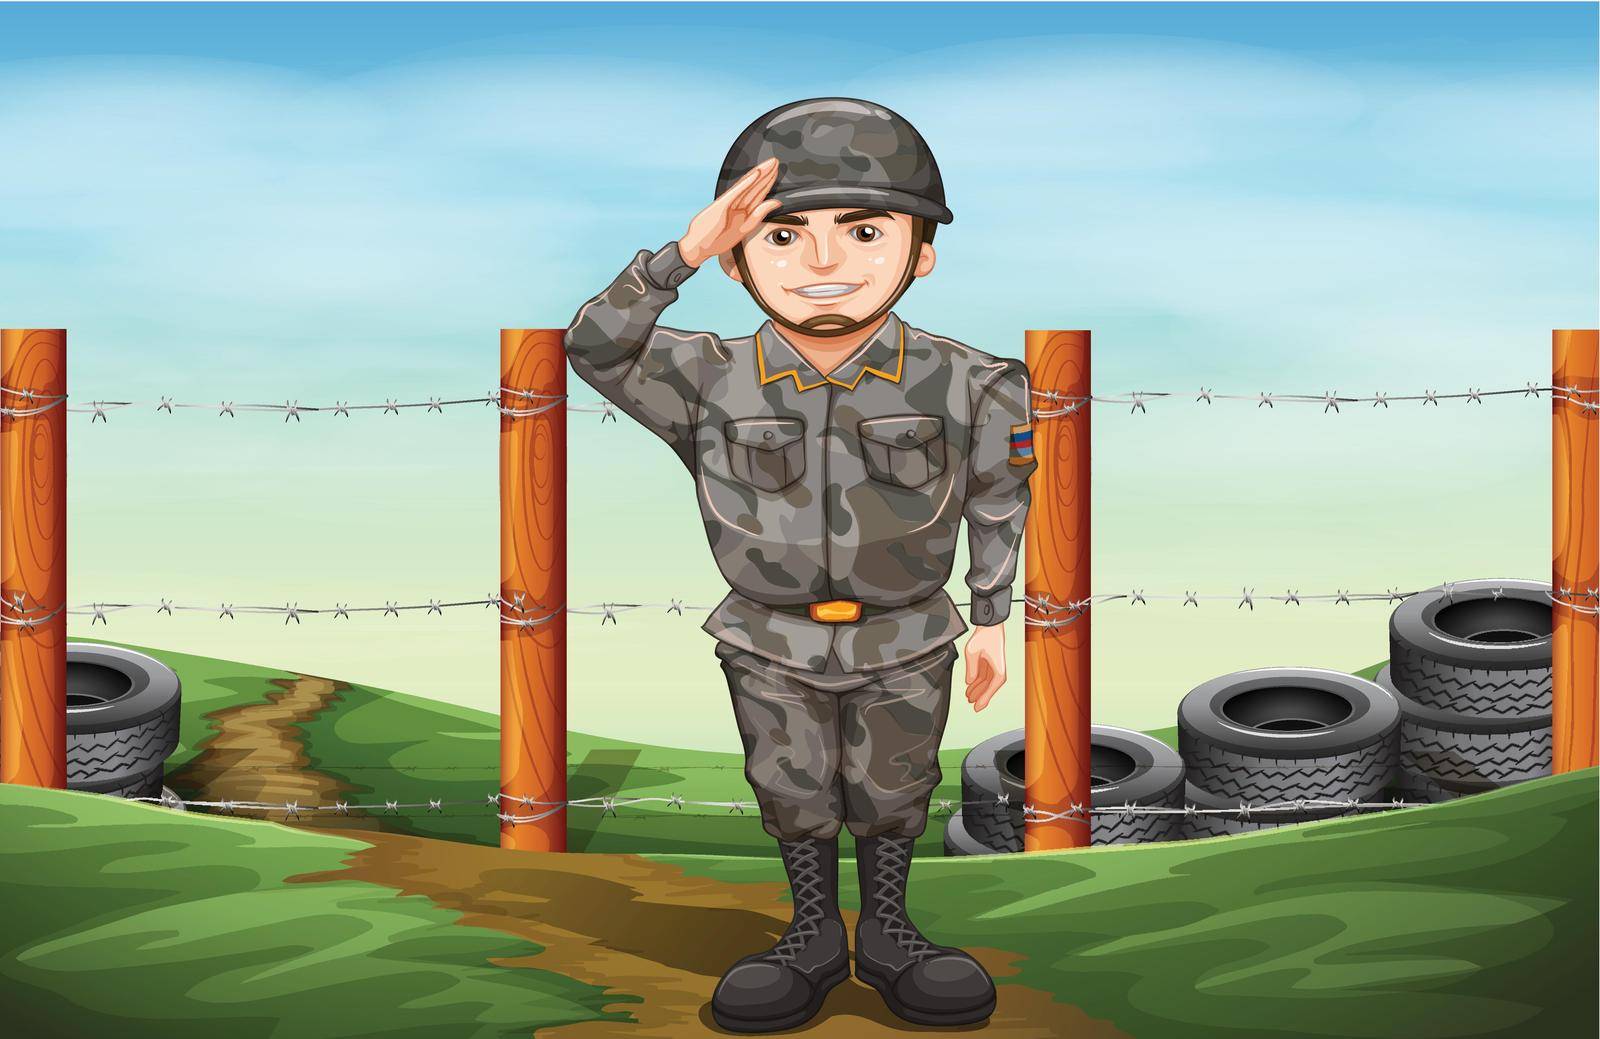 Illustration of a military officer